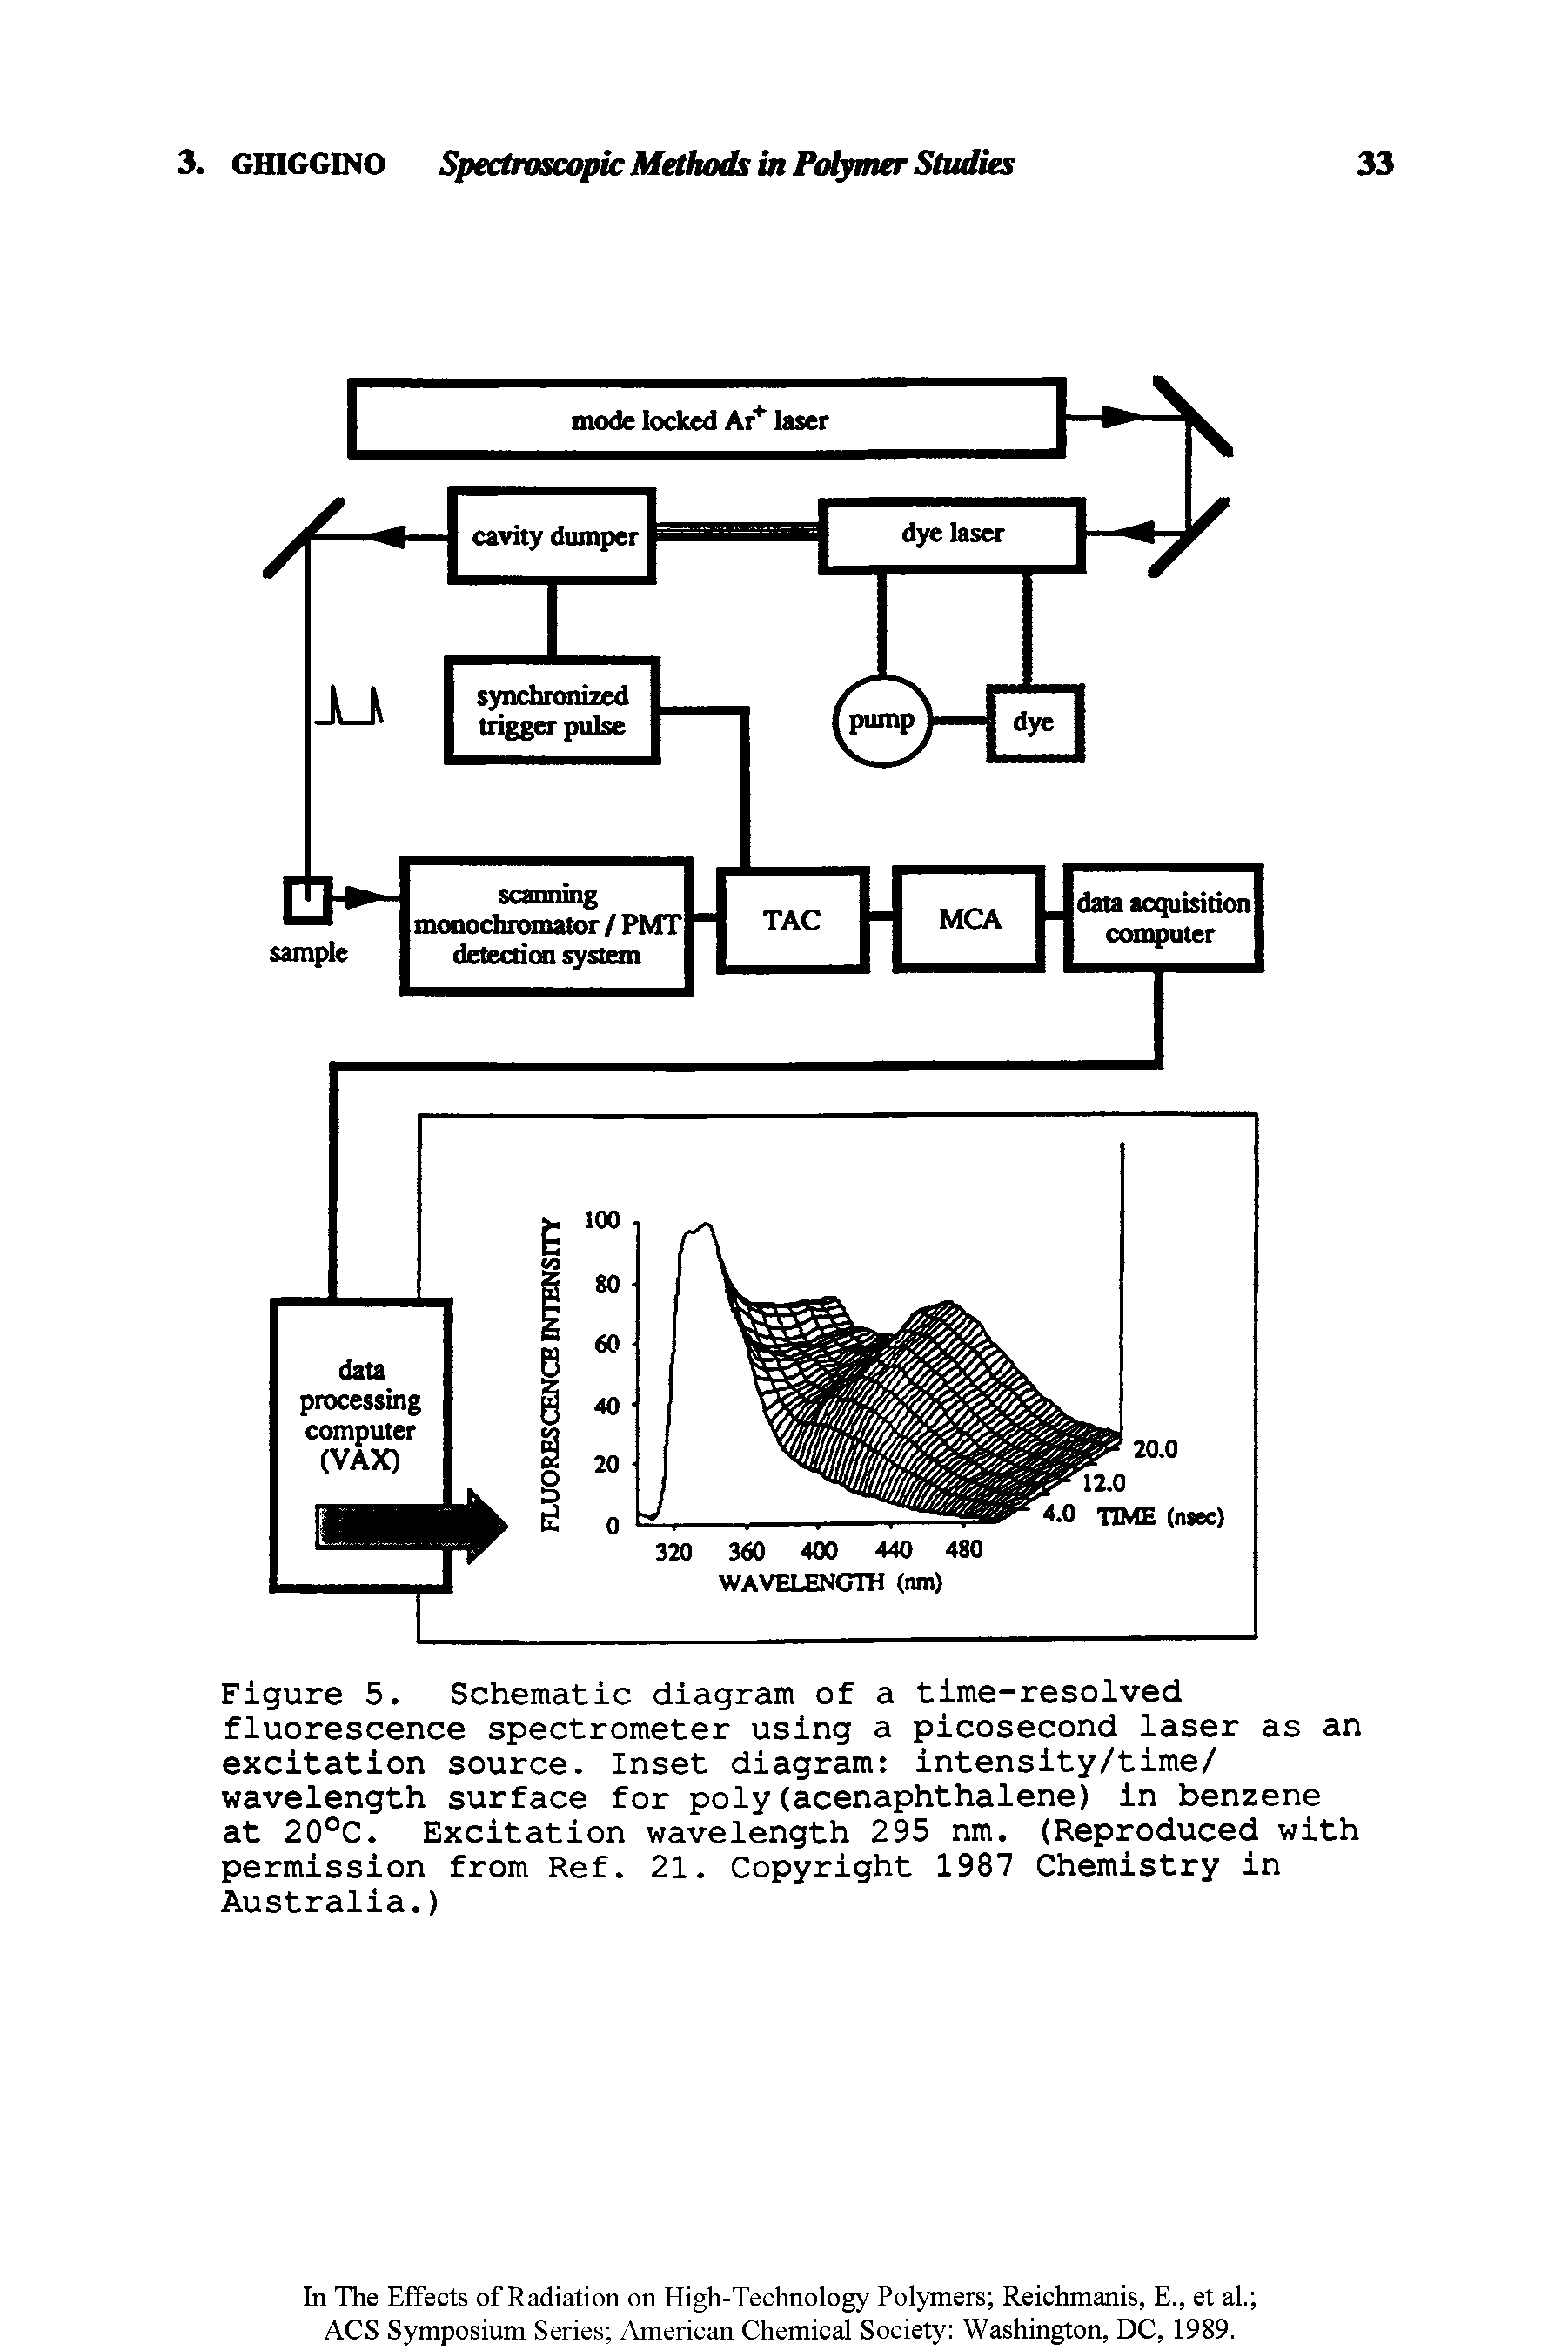 Figure 5. Schematic diagram of a time-resolved fluorescence spectrometer using a picosecond laser as an excitation source. Inset diagram intensity/time/ wavelength surface for poly (acenaphthalene) in benzene at 20°C. Excitation wavelength 295 nm. (Reproduced with permission from Ref. 21. Copyright 1987 Chemistry in Australia.)...